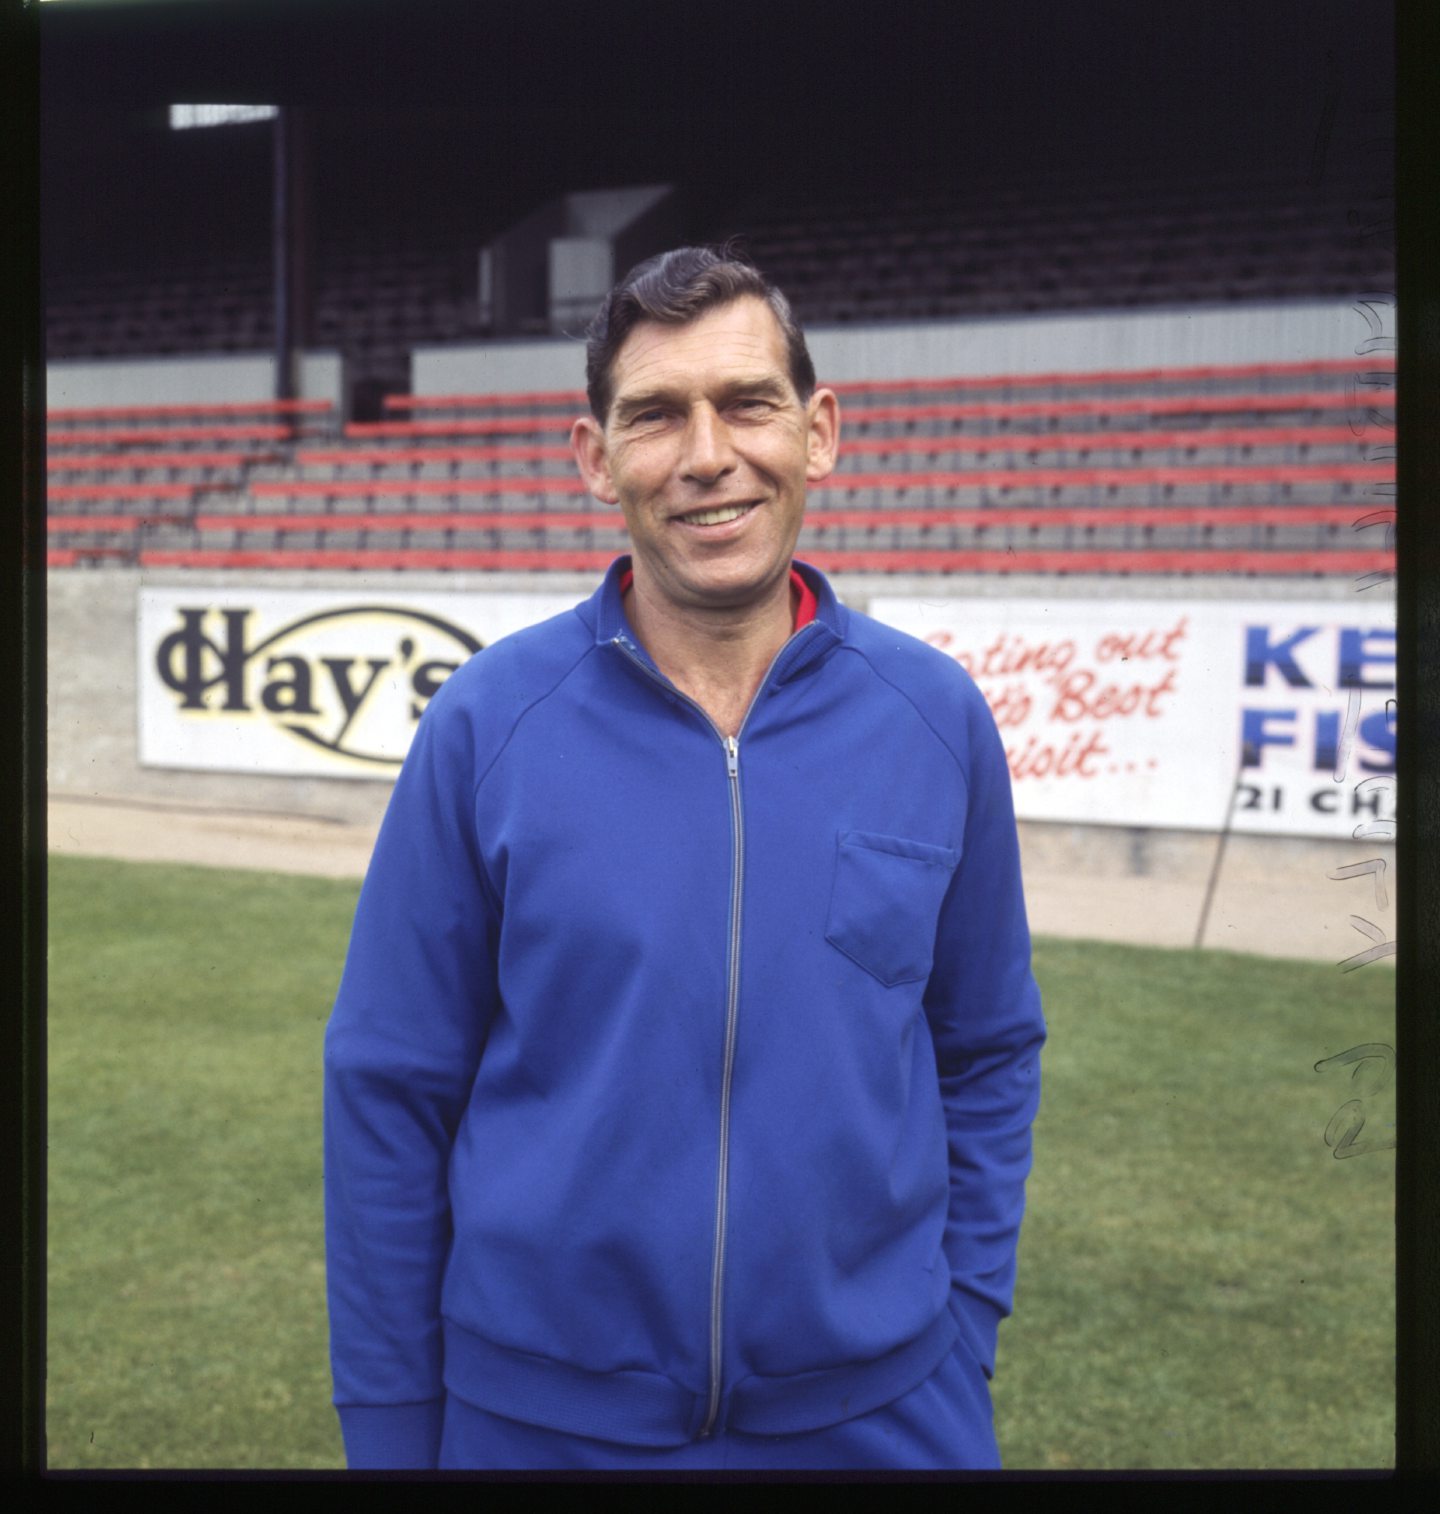 A portrait of Aberdeen FC manager Eddie Turnbull in the late 60s.